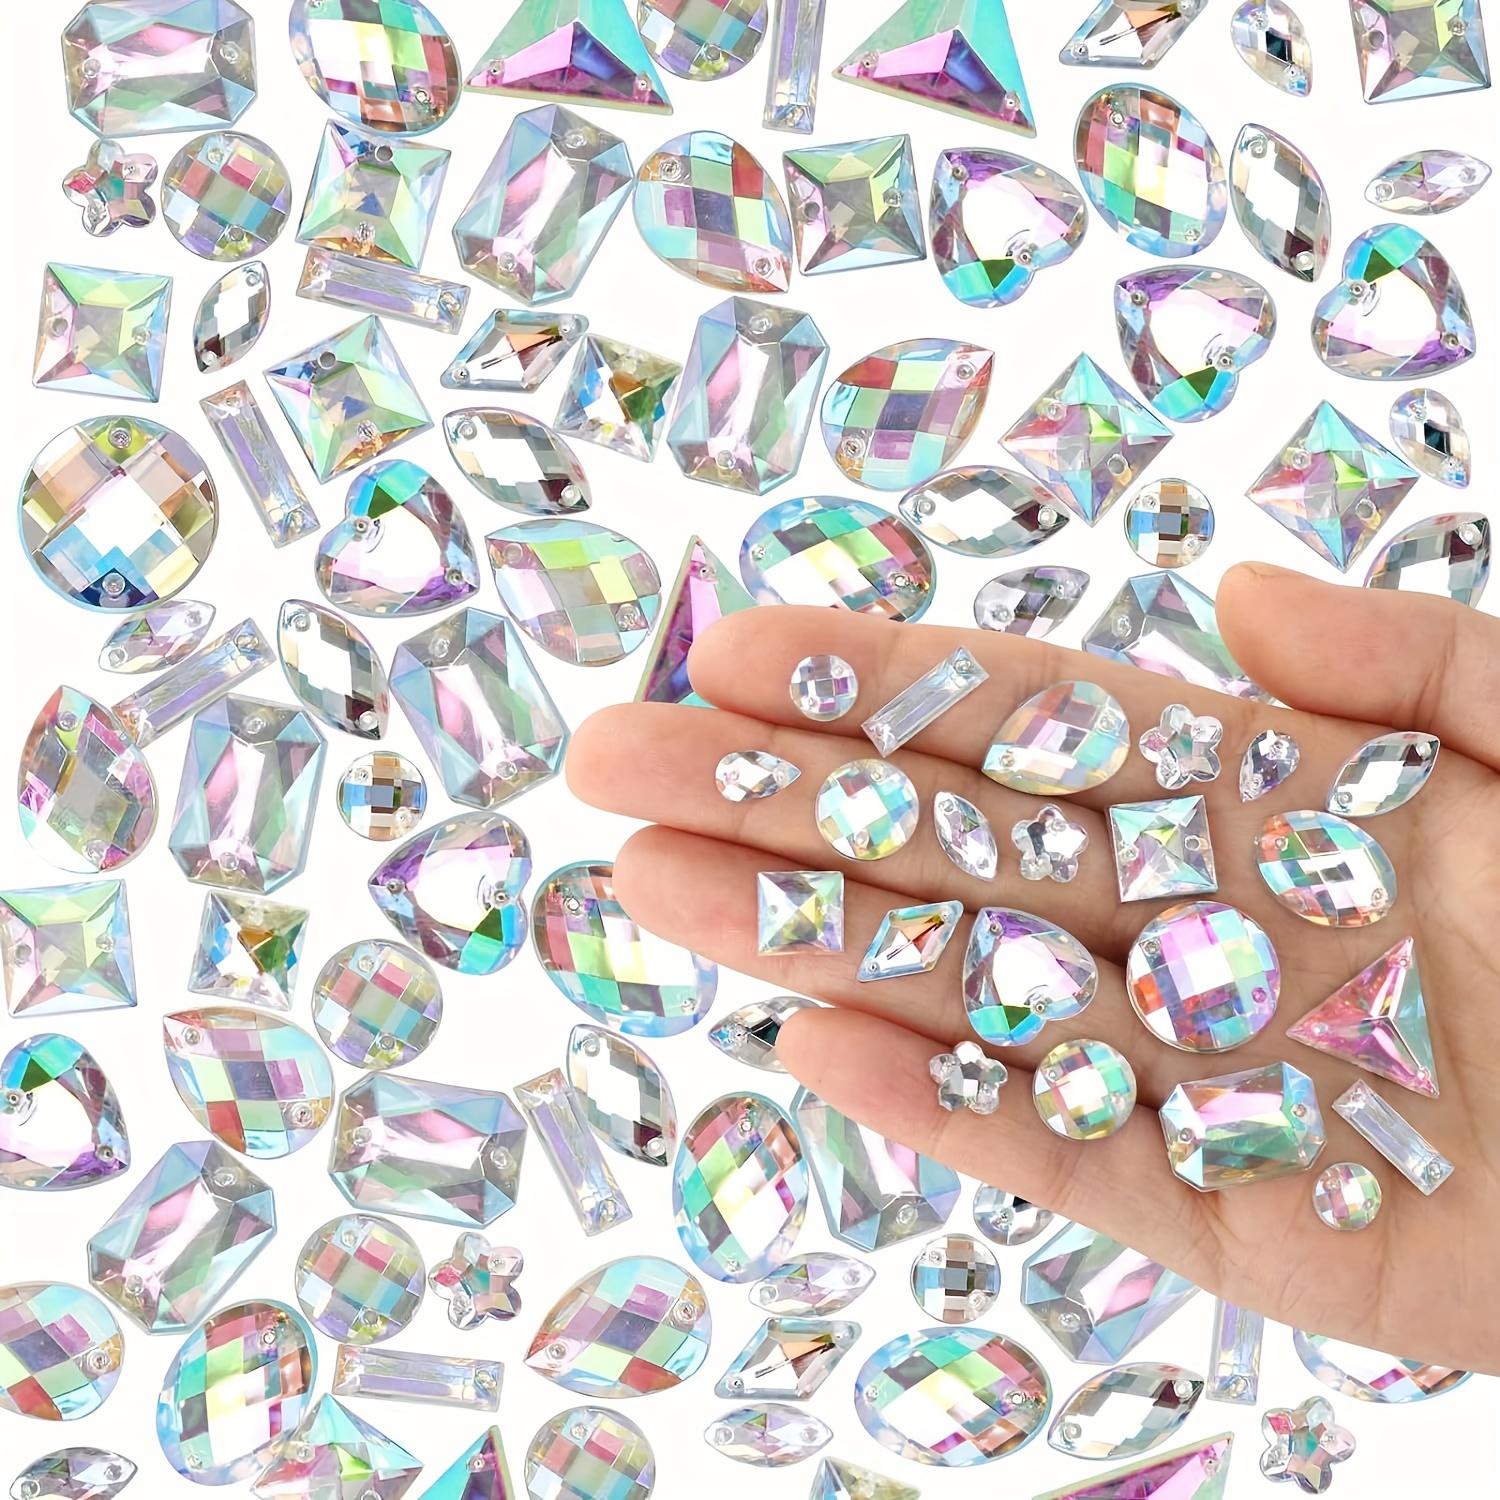 

100 Pieces Large Acrylic Rhinestones With Sewing Holes, Mixed Shapes Crystal Ab Embellishments For Diy Crafts, Clothing, And Shoes Decoration